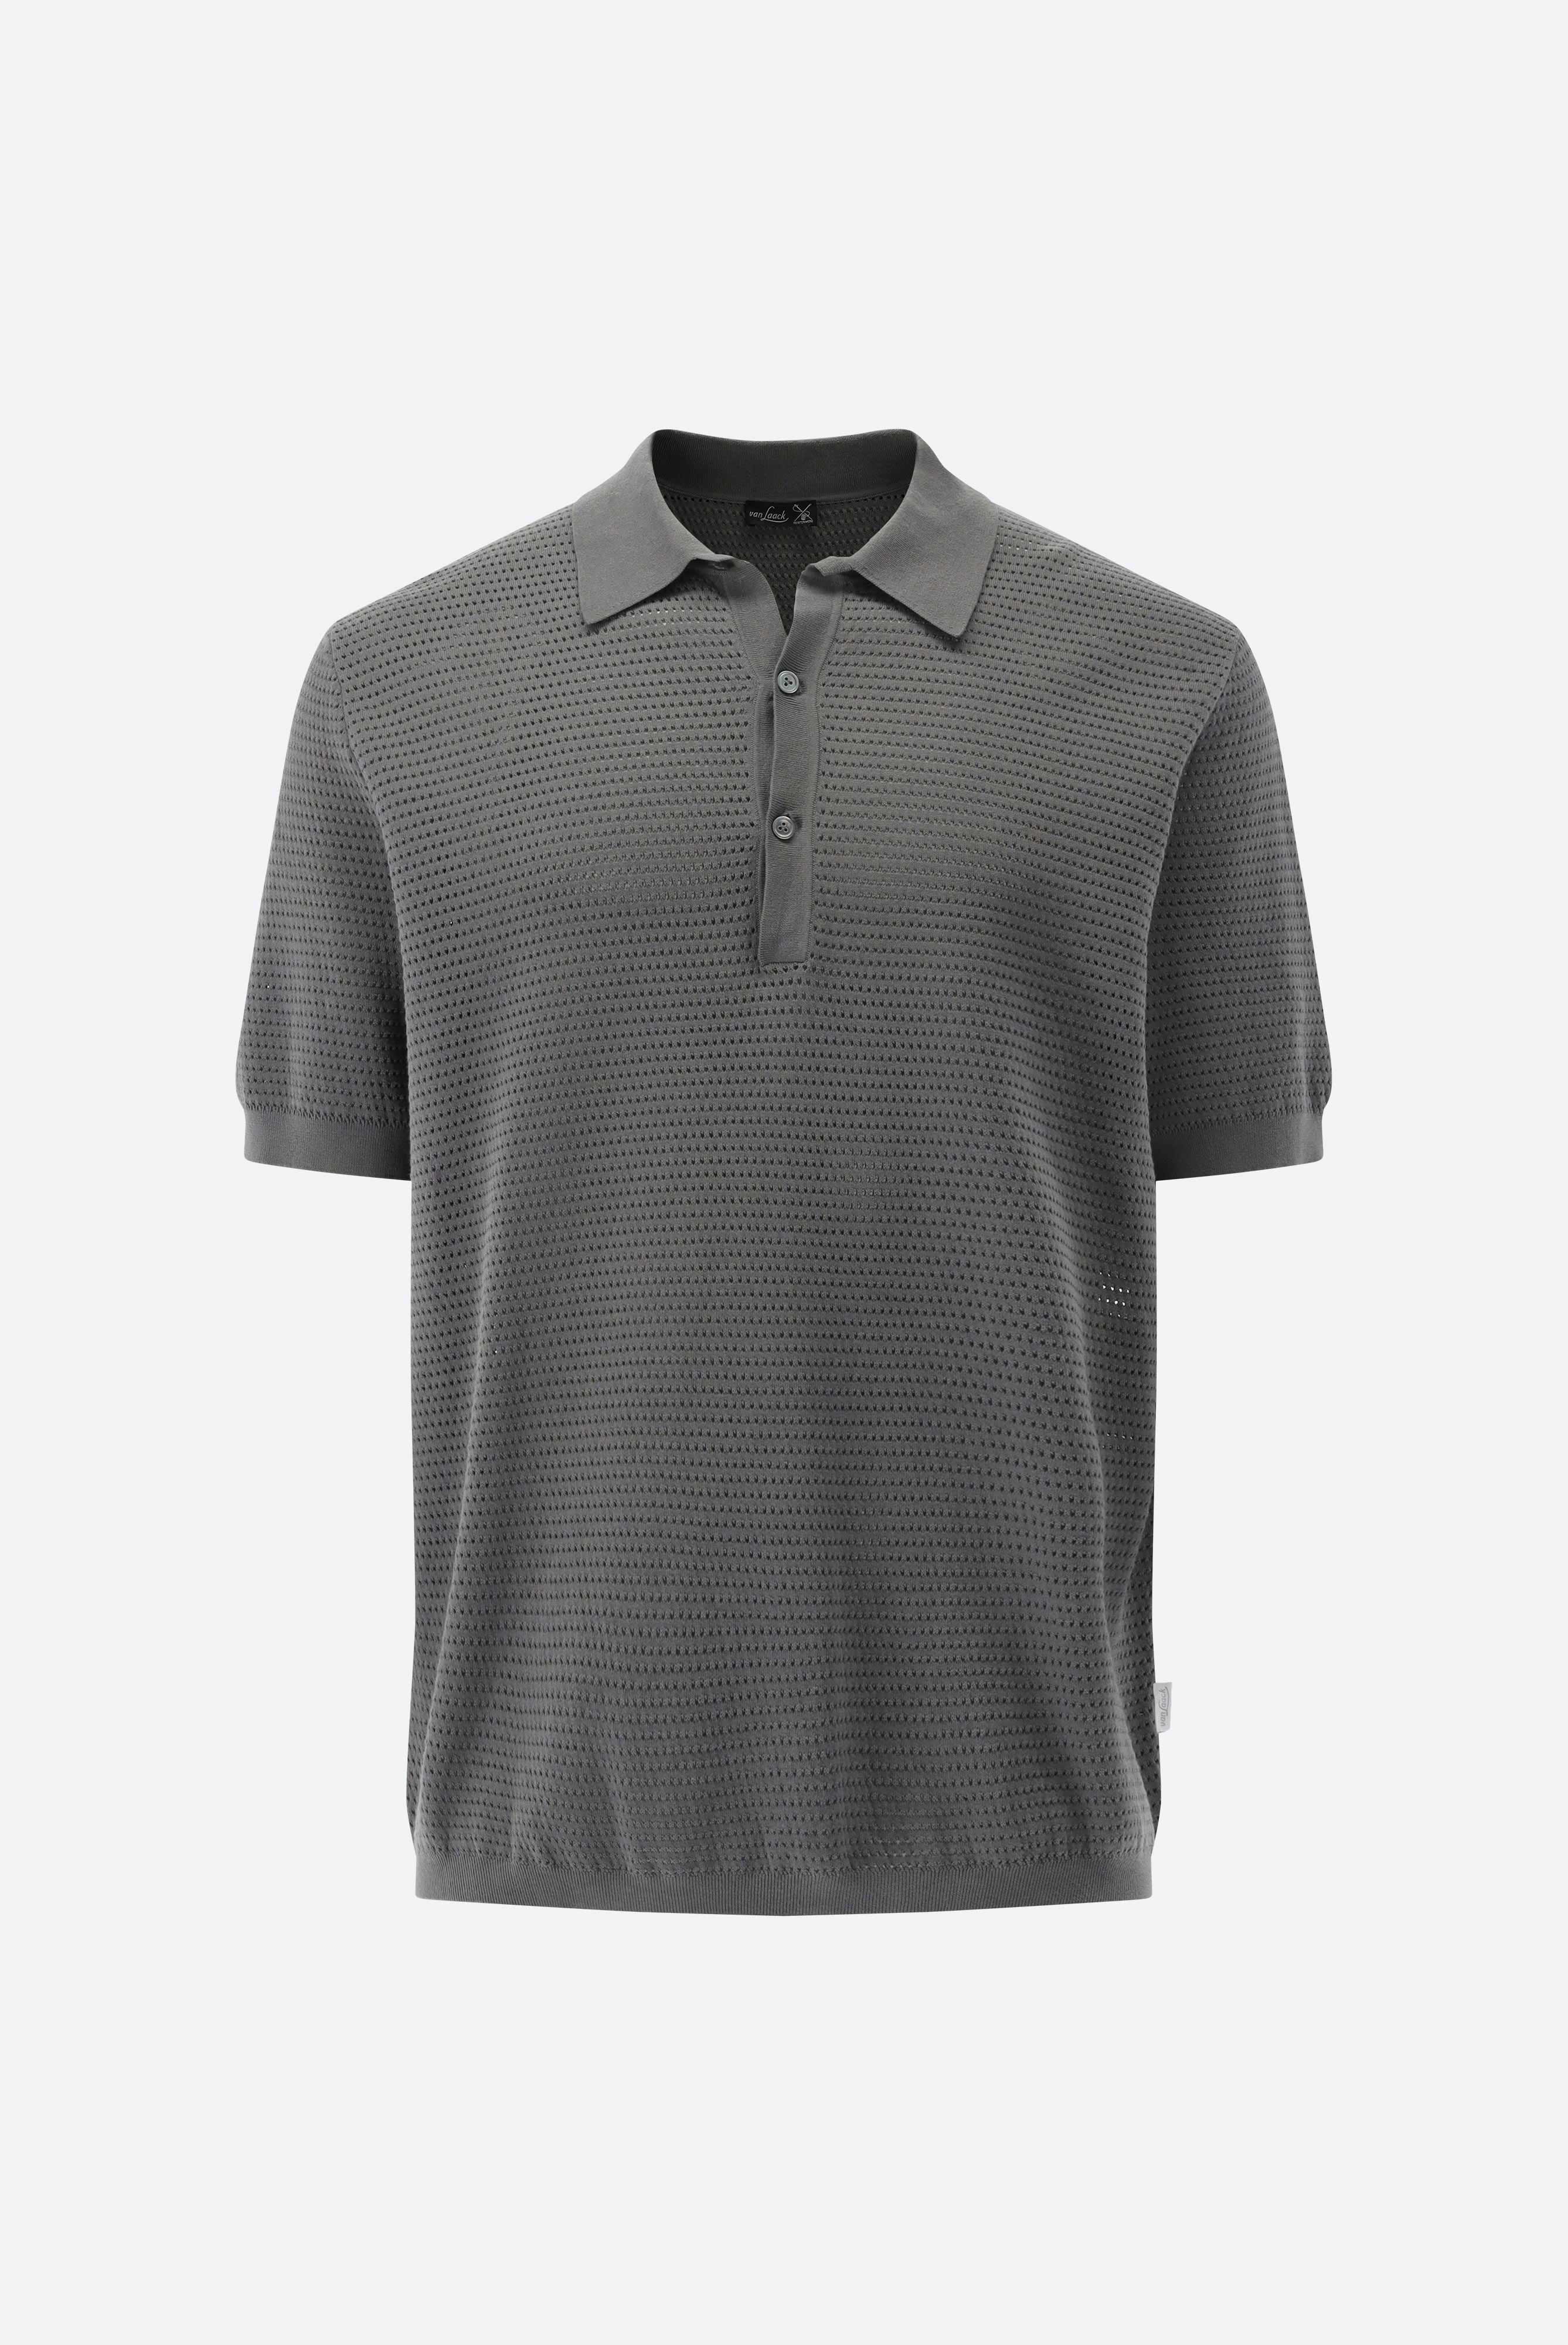 Poloshirts+Polo Shirt with Mesh Structure in Air Cotton+82.8651..S00267.070.S